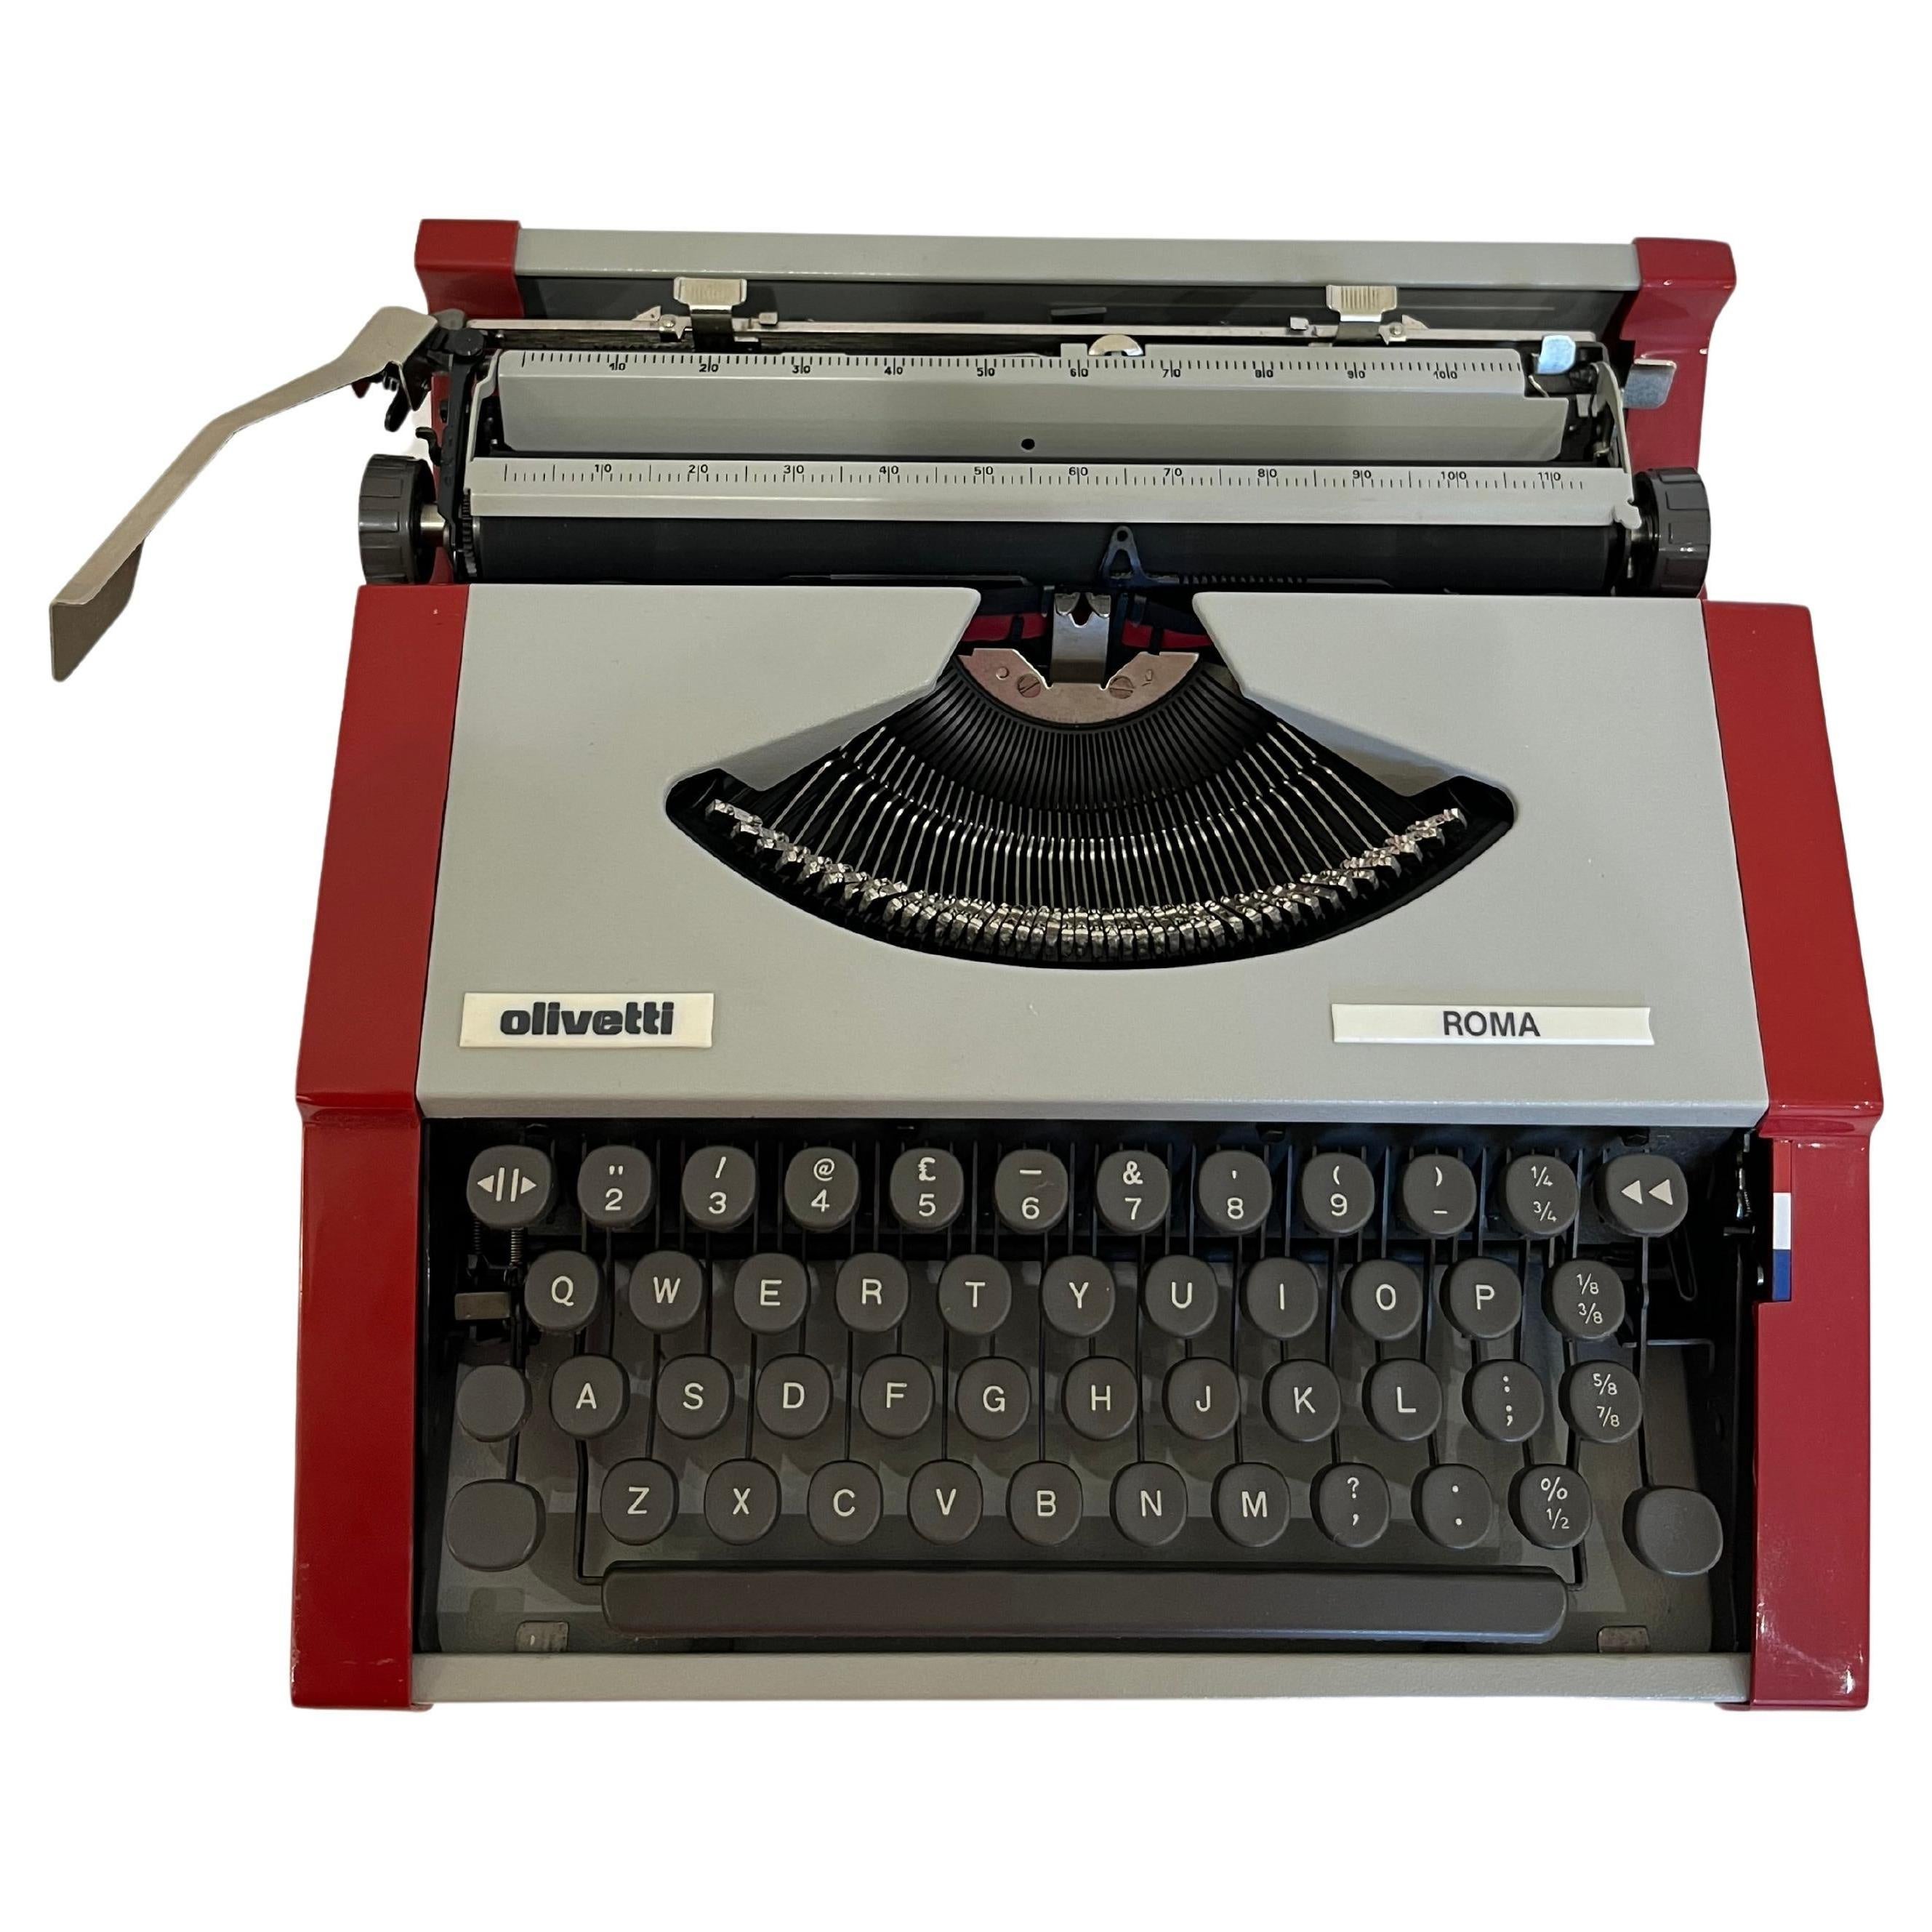 Olivetti portable typewriter model Roma 1984
Produced, like the Lettera 82, in the Brazilian Olivetti factory.
Intact and functional, equipped with transport cover.

Features: Portable manual typewriter.
Keyboard: 42 keys, corresponding to 84